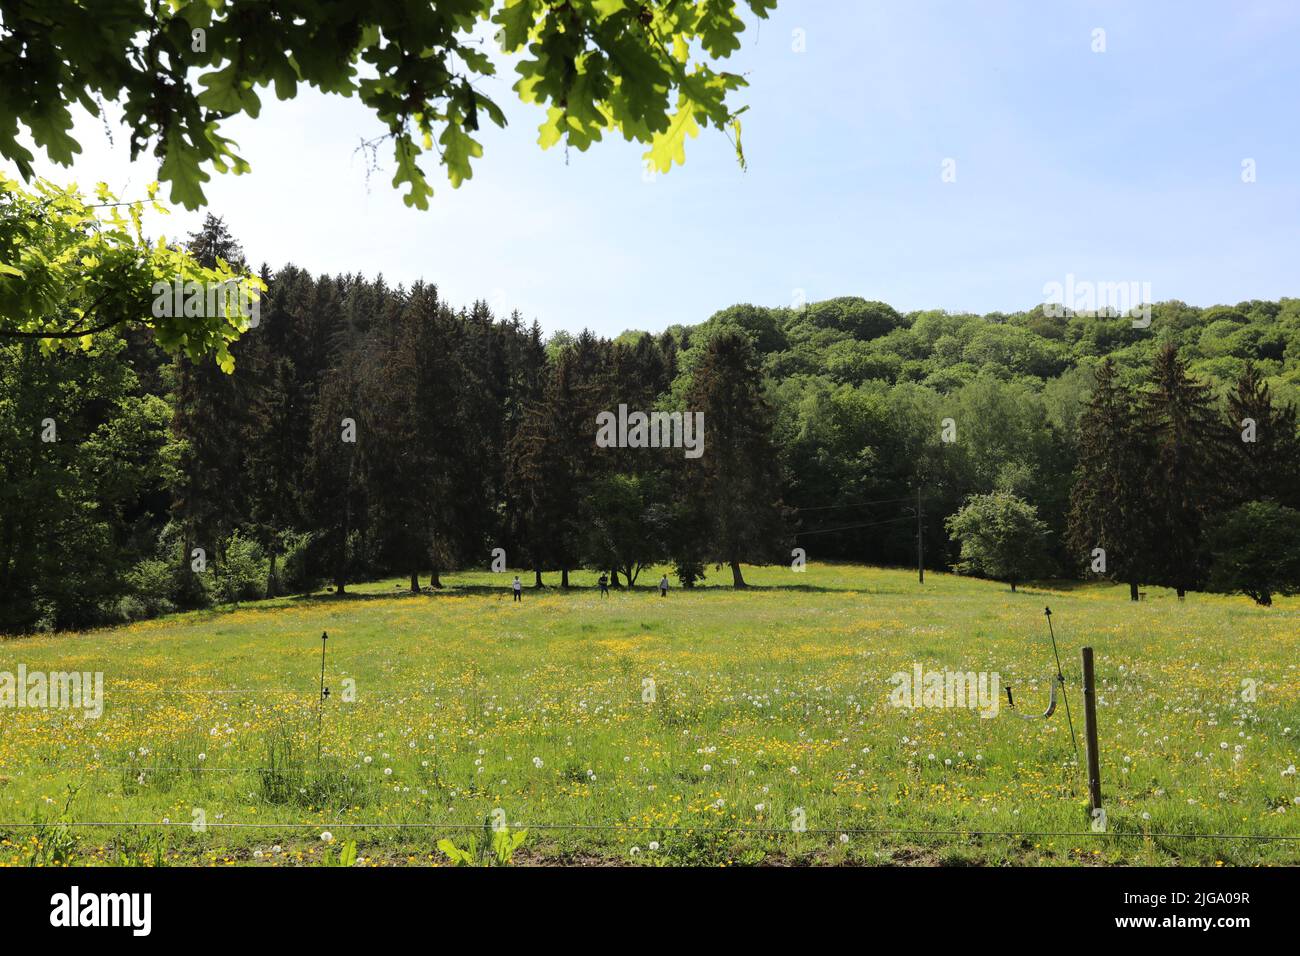 Green land with trees Stock Photo